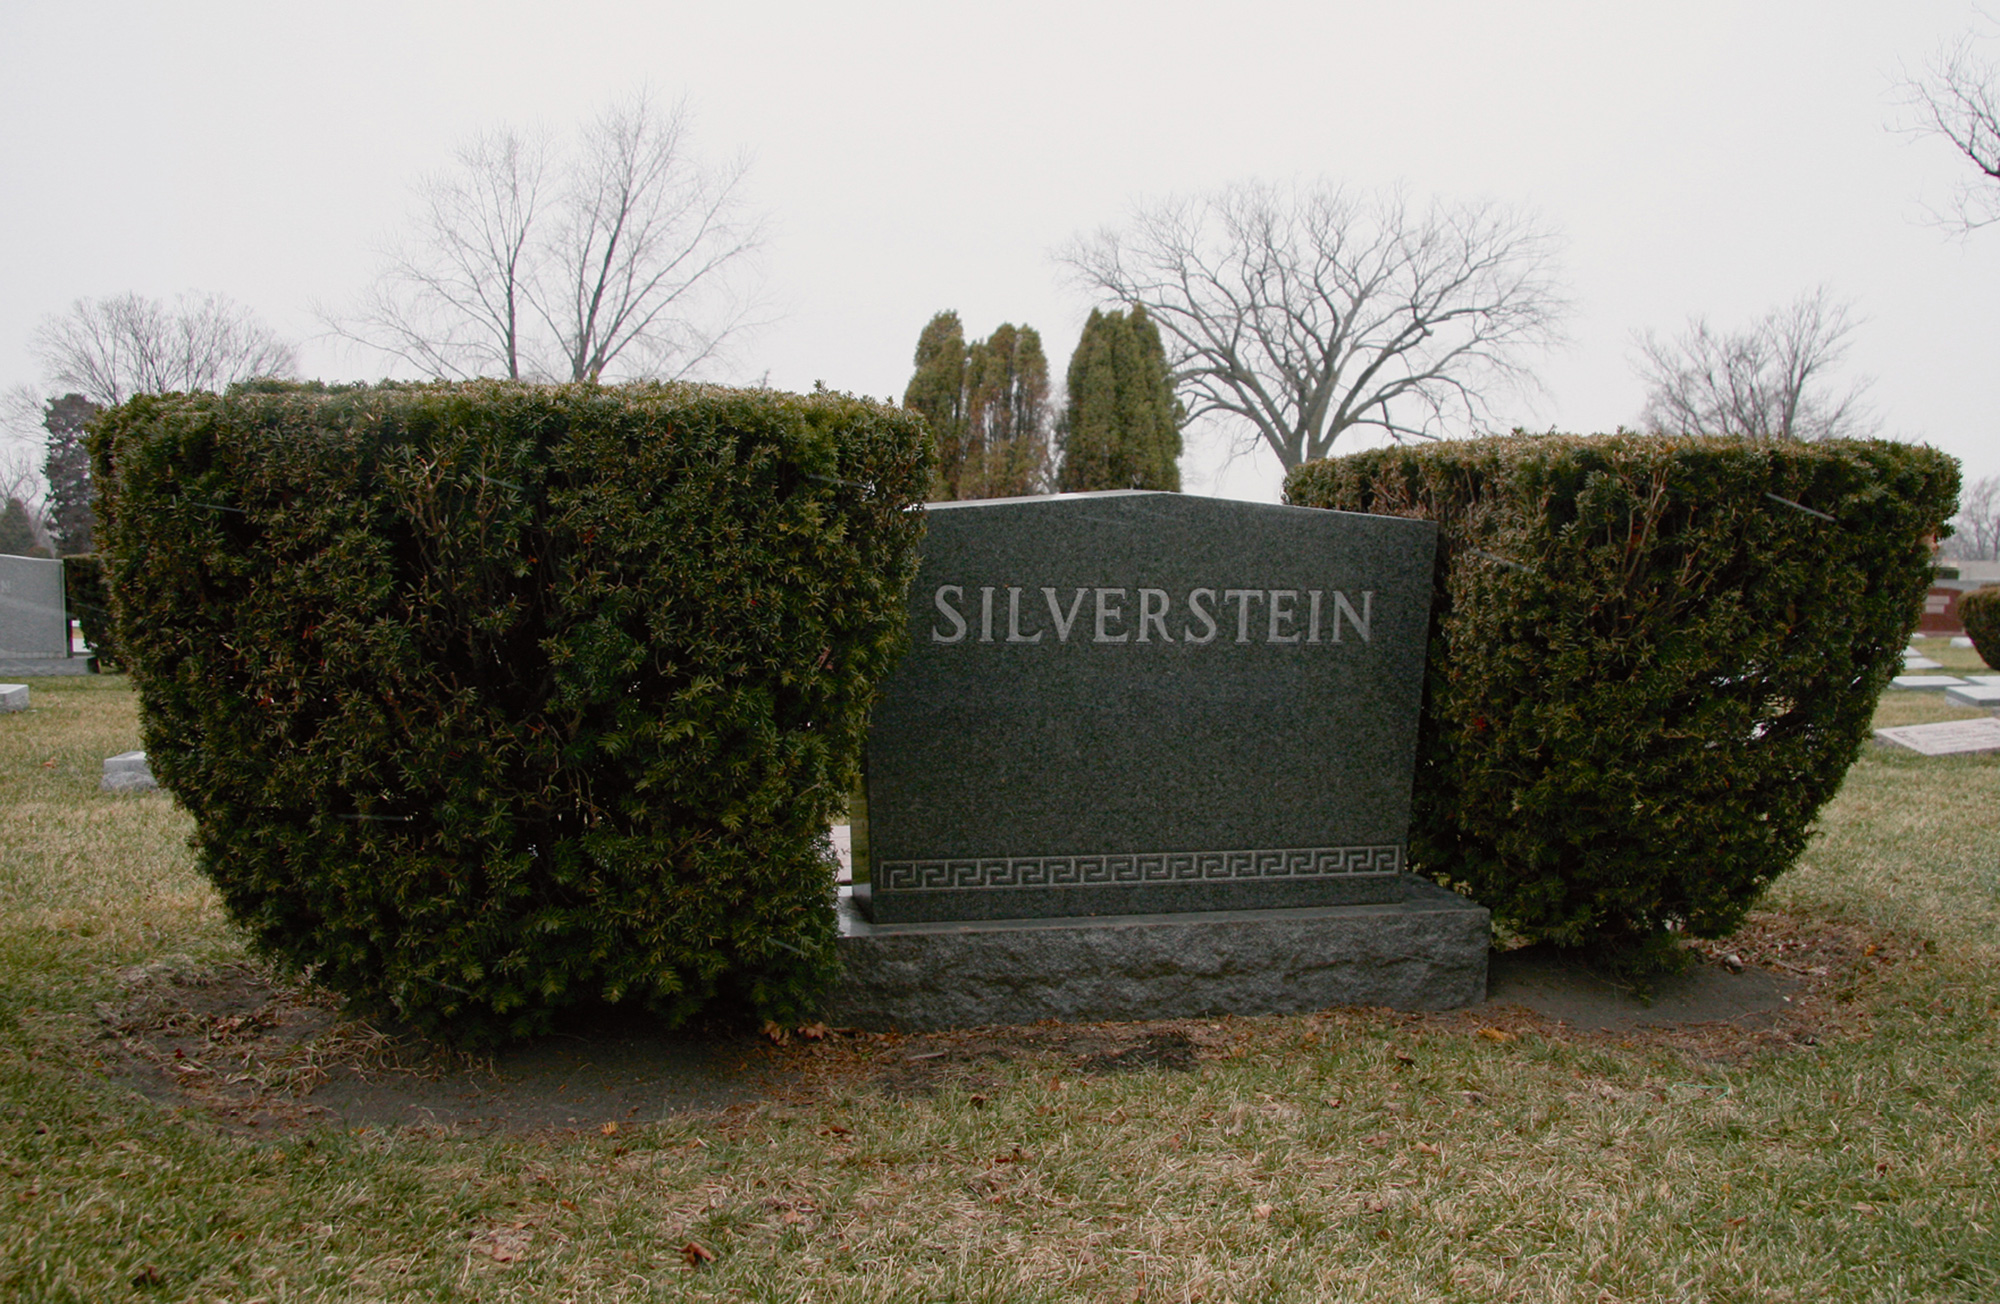 A photograph of a grave inscribed “Silverstein” in Chicago’s Westlawn Cemetery.